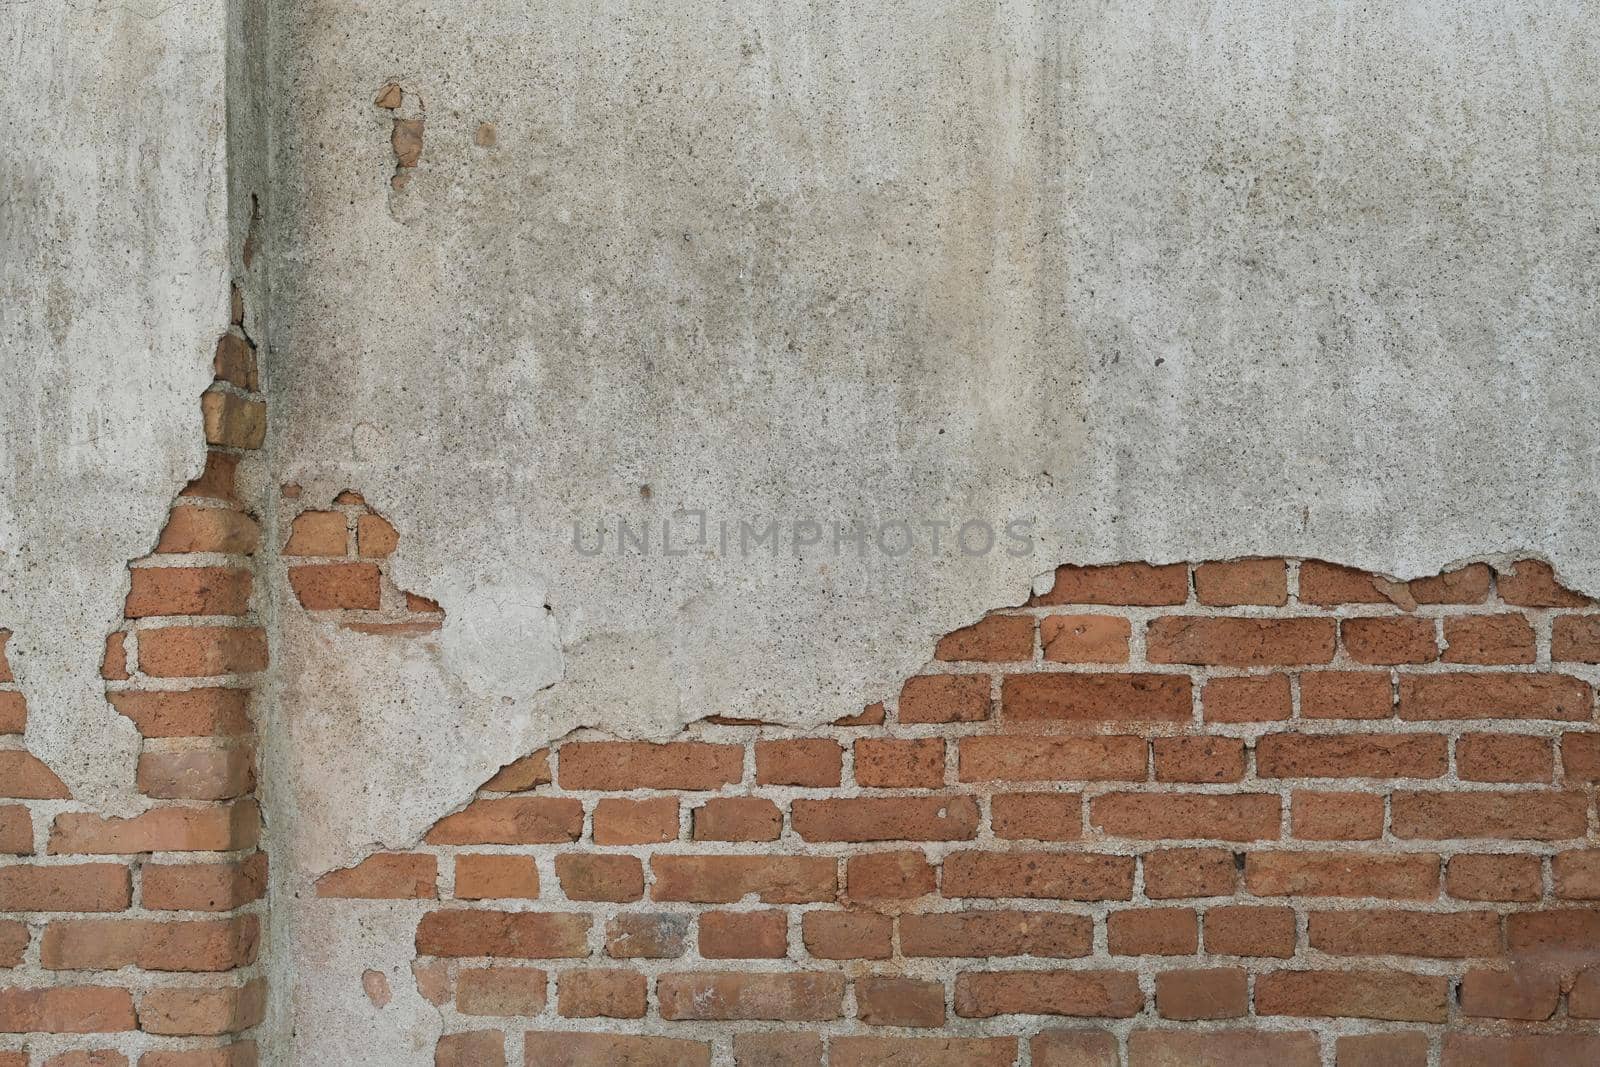 Empty old brick wall texture. Copy for graphic display montage. by prathanchorruangsak